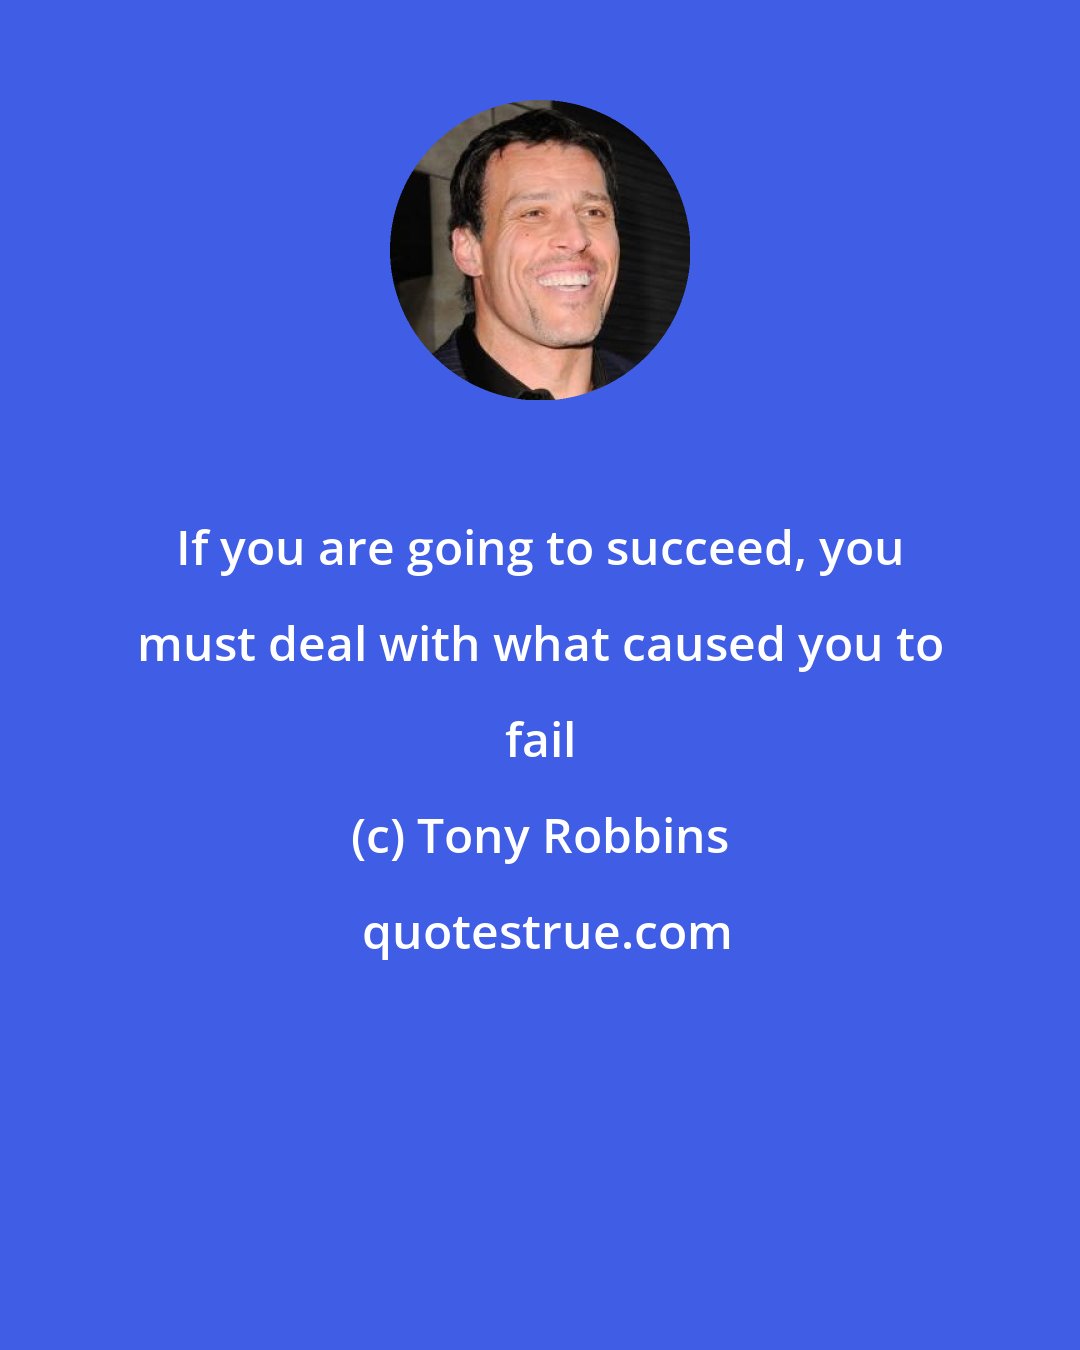 Tony Robbins: If you are going to succeed, you must deal with what caused you to fail